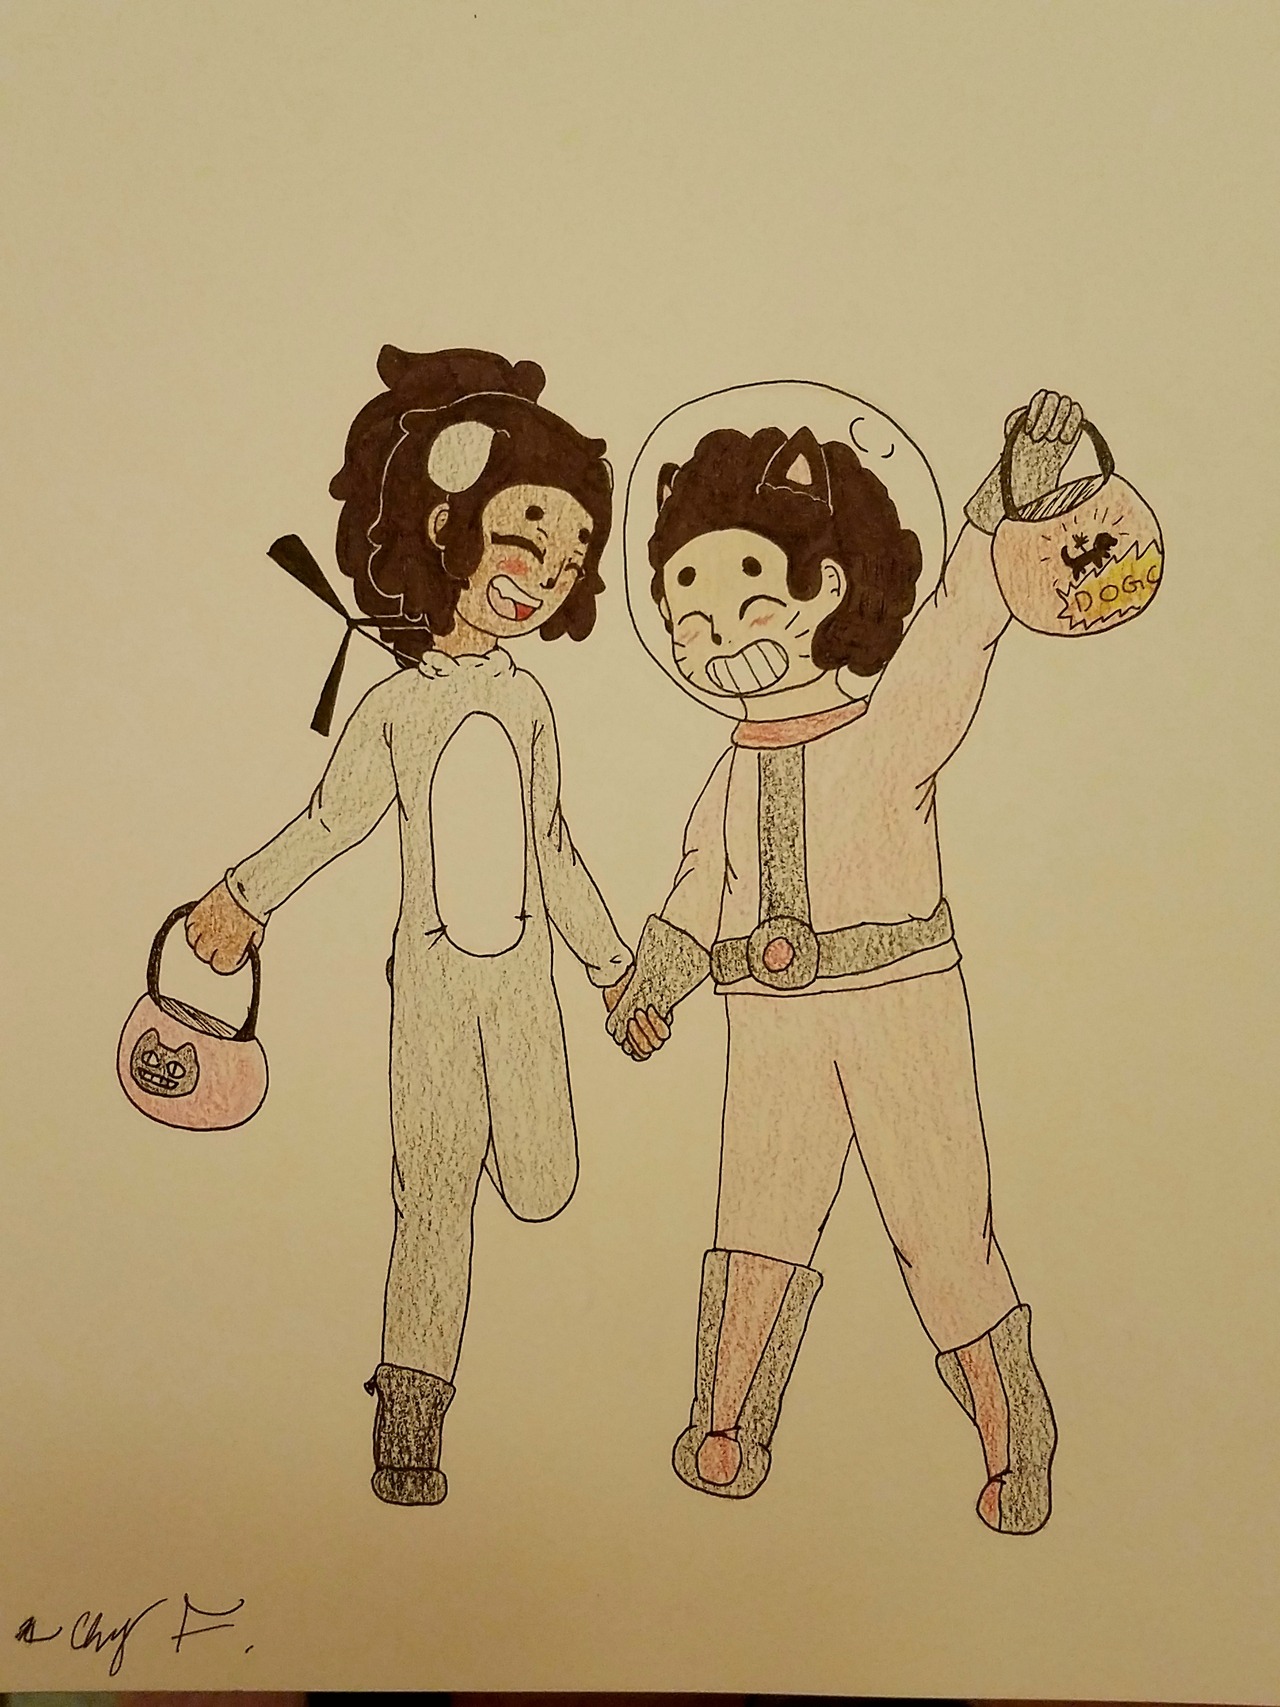 Steven and Connie holding hands for @thatnerdannie (Thought a Halloween themed one would be cute. Dogcopter and Cookie Cat, haha) Hope you like it!